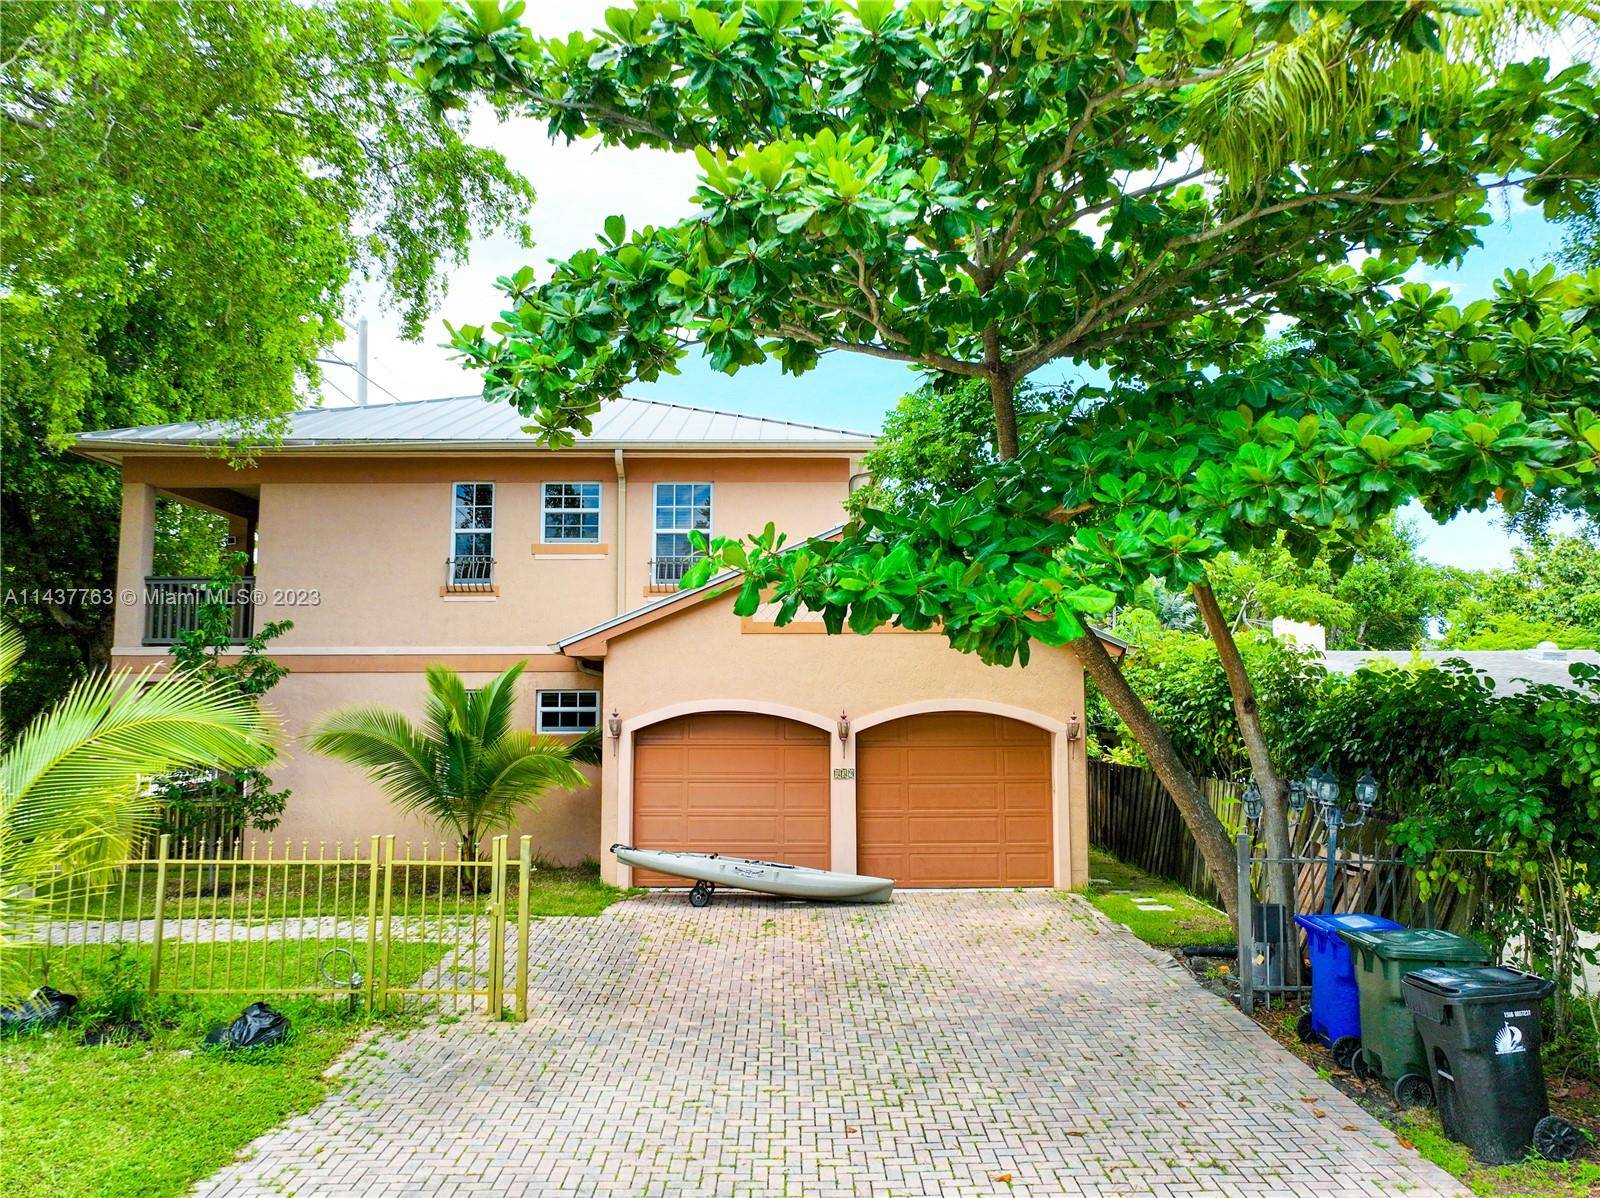 Stunning Townhome looks and feels like single family home with 4 bedrooms and 3 full bathrooms located in Tarpon River.